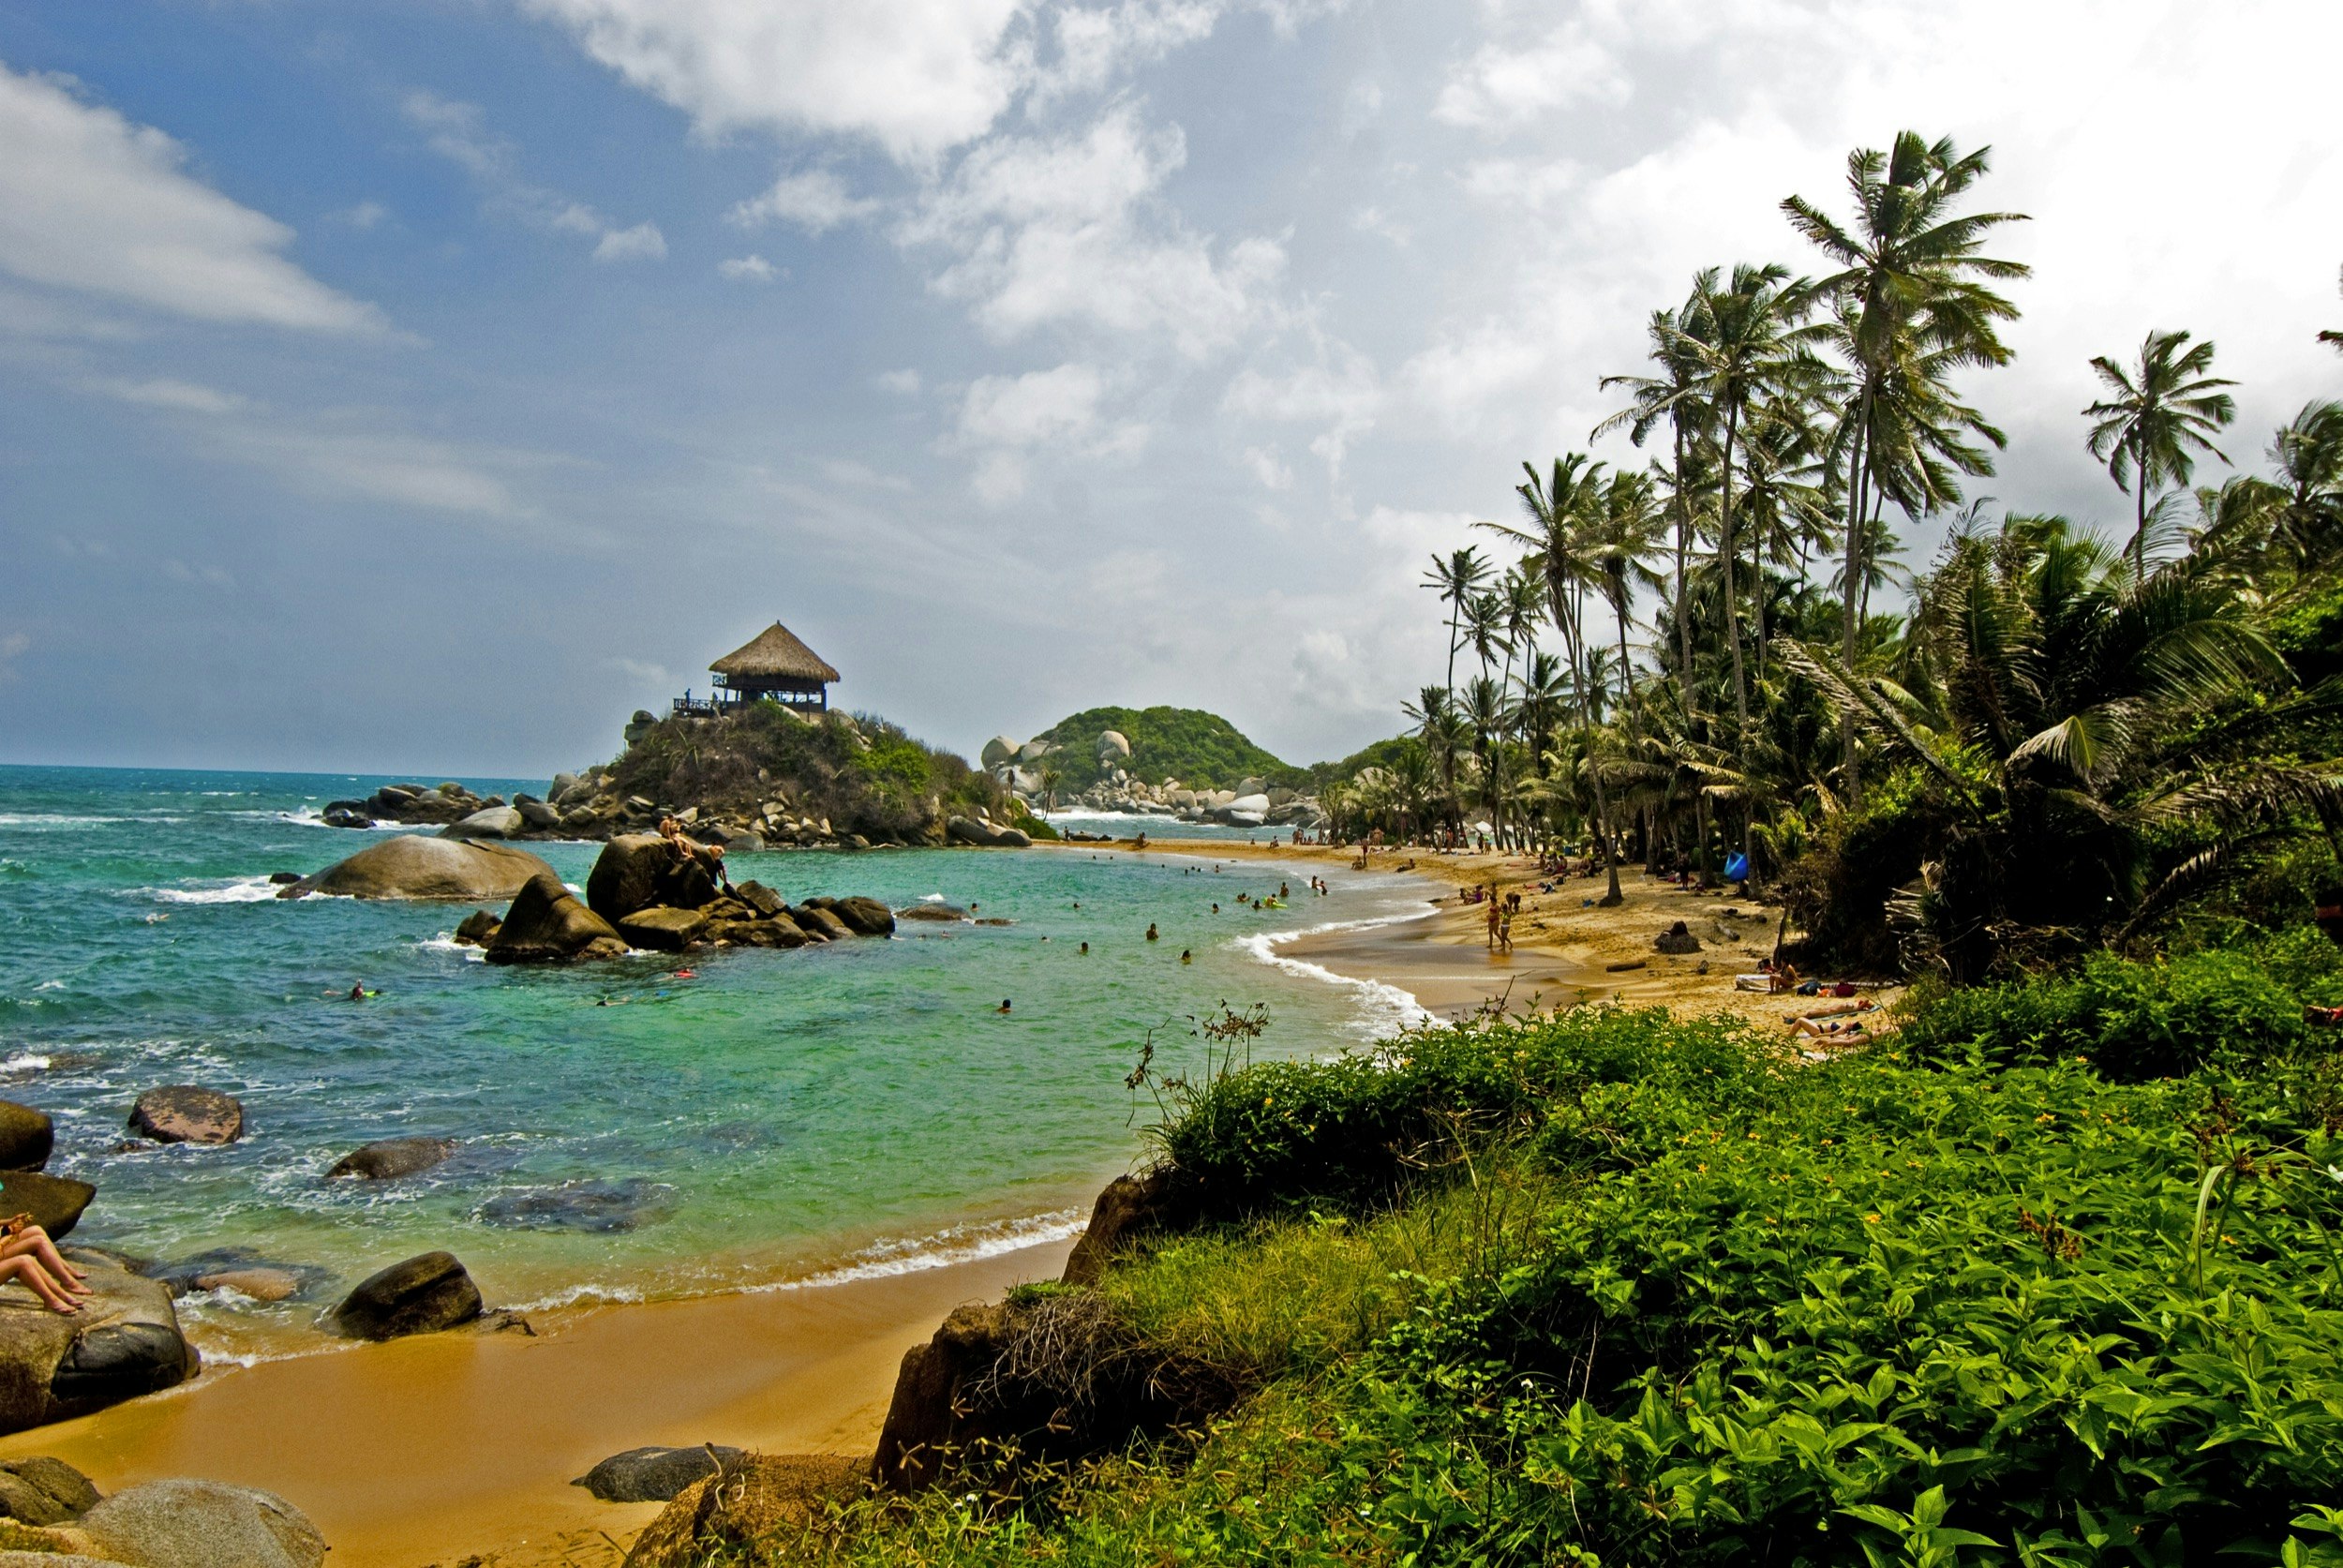 People party and play on a rocky beach cove in Colombia with crystal-clear blue green water and soft golden sand